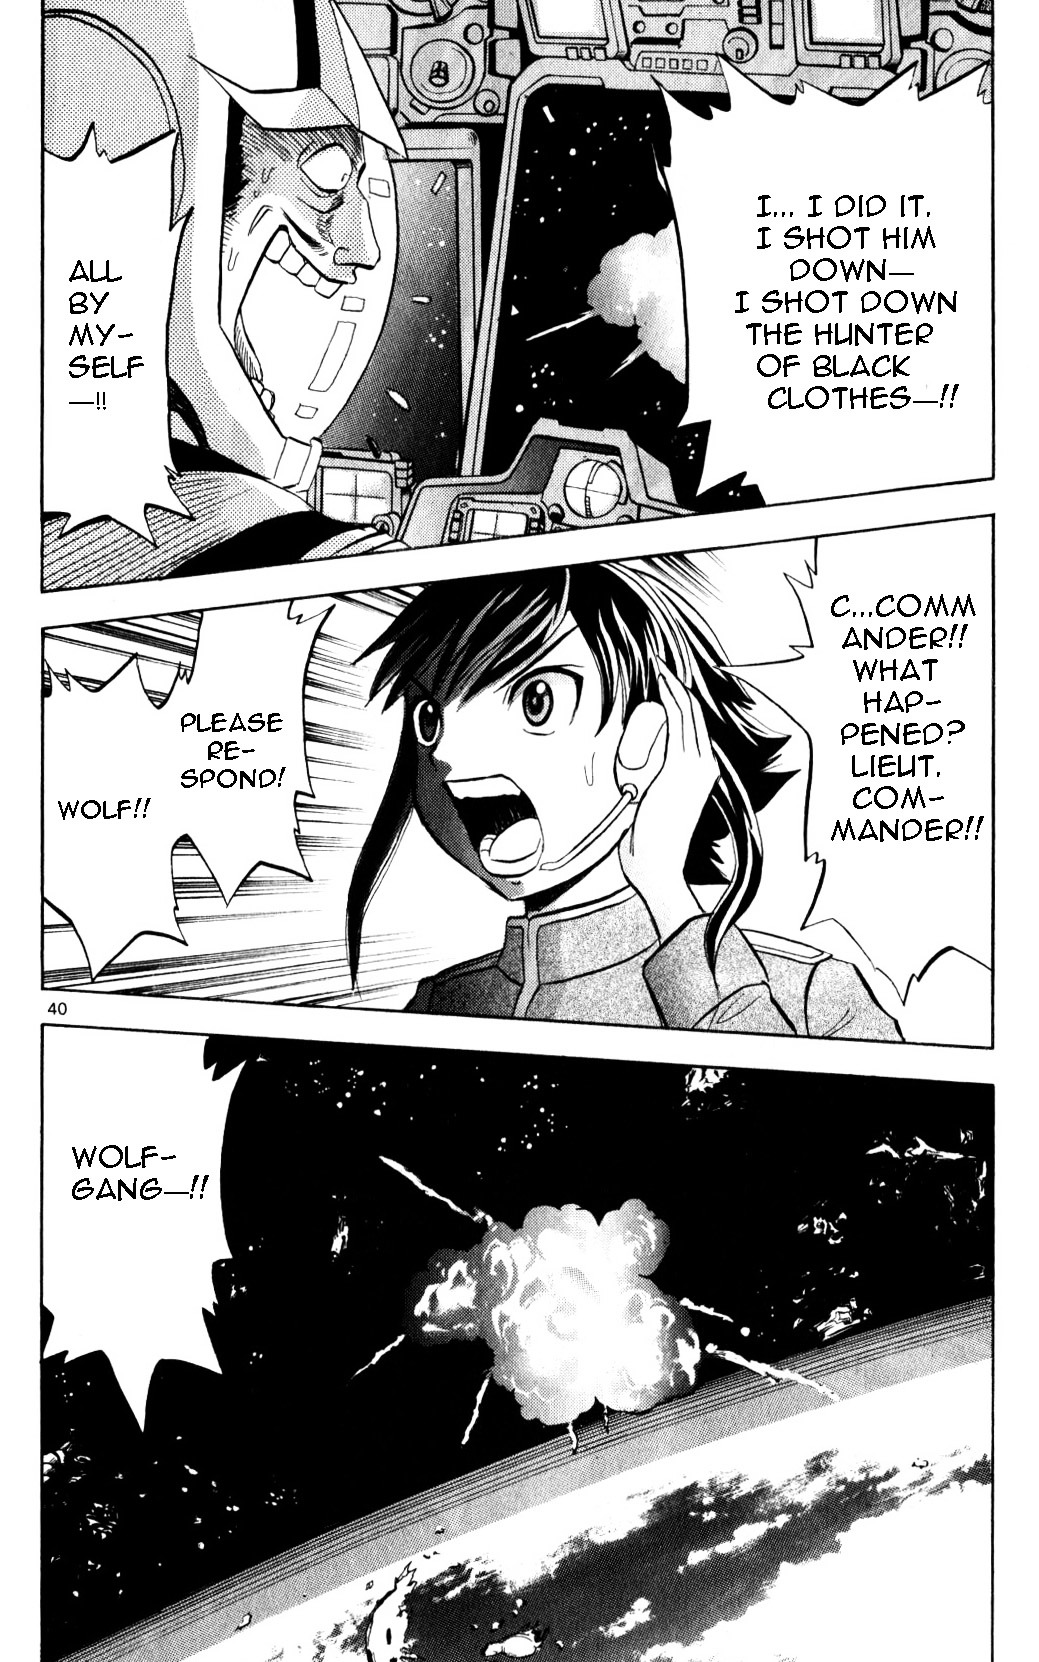 Mobile Suit Gundam: Hunter Of Black Clothes Chapter 0 #41